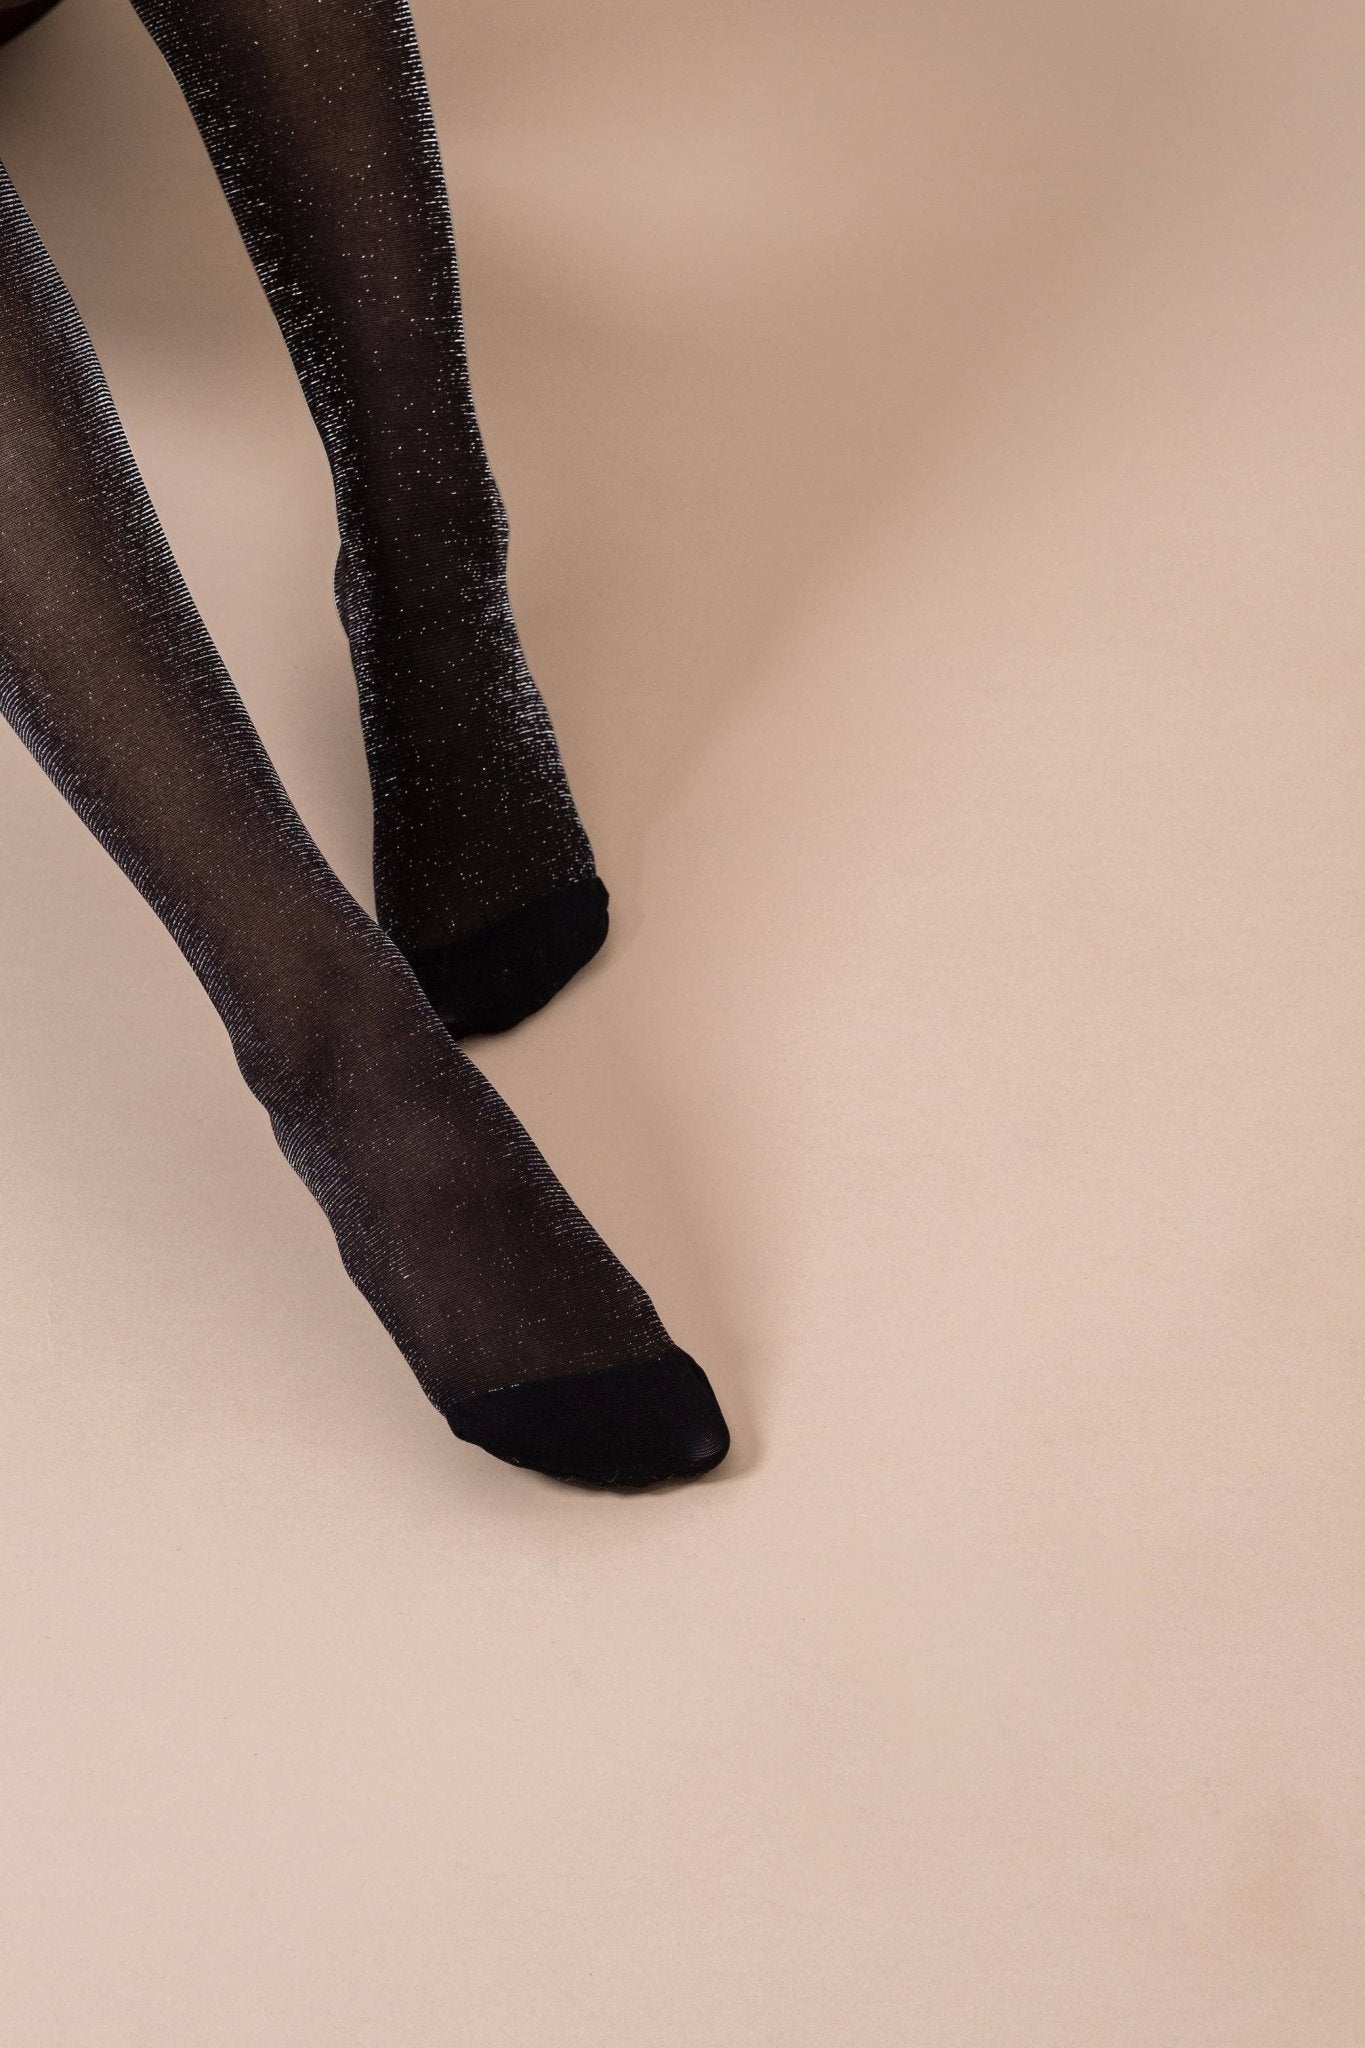 The Diamond Dust Shimmer Tights: A-B